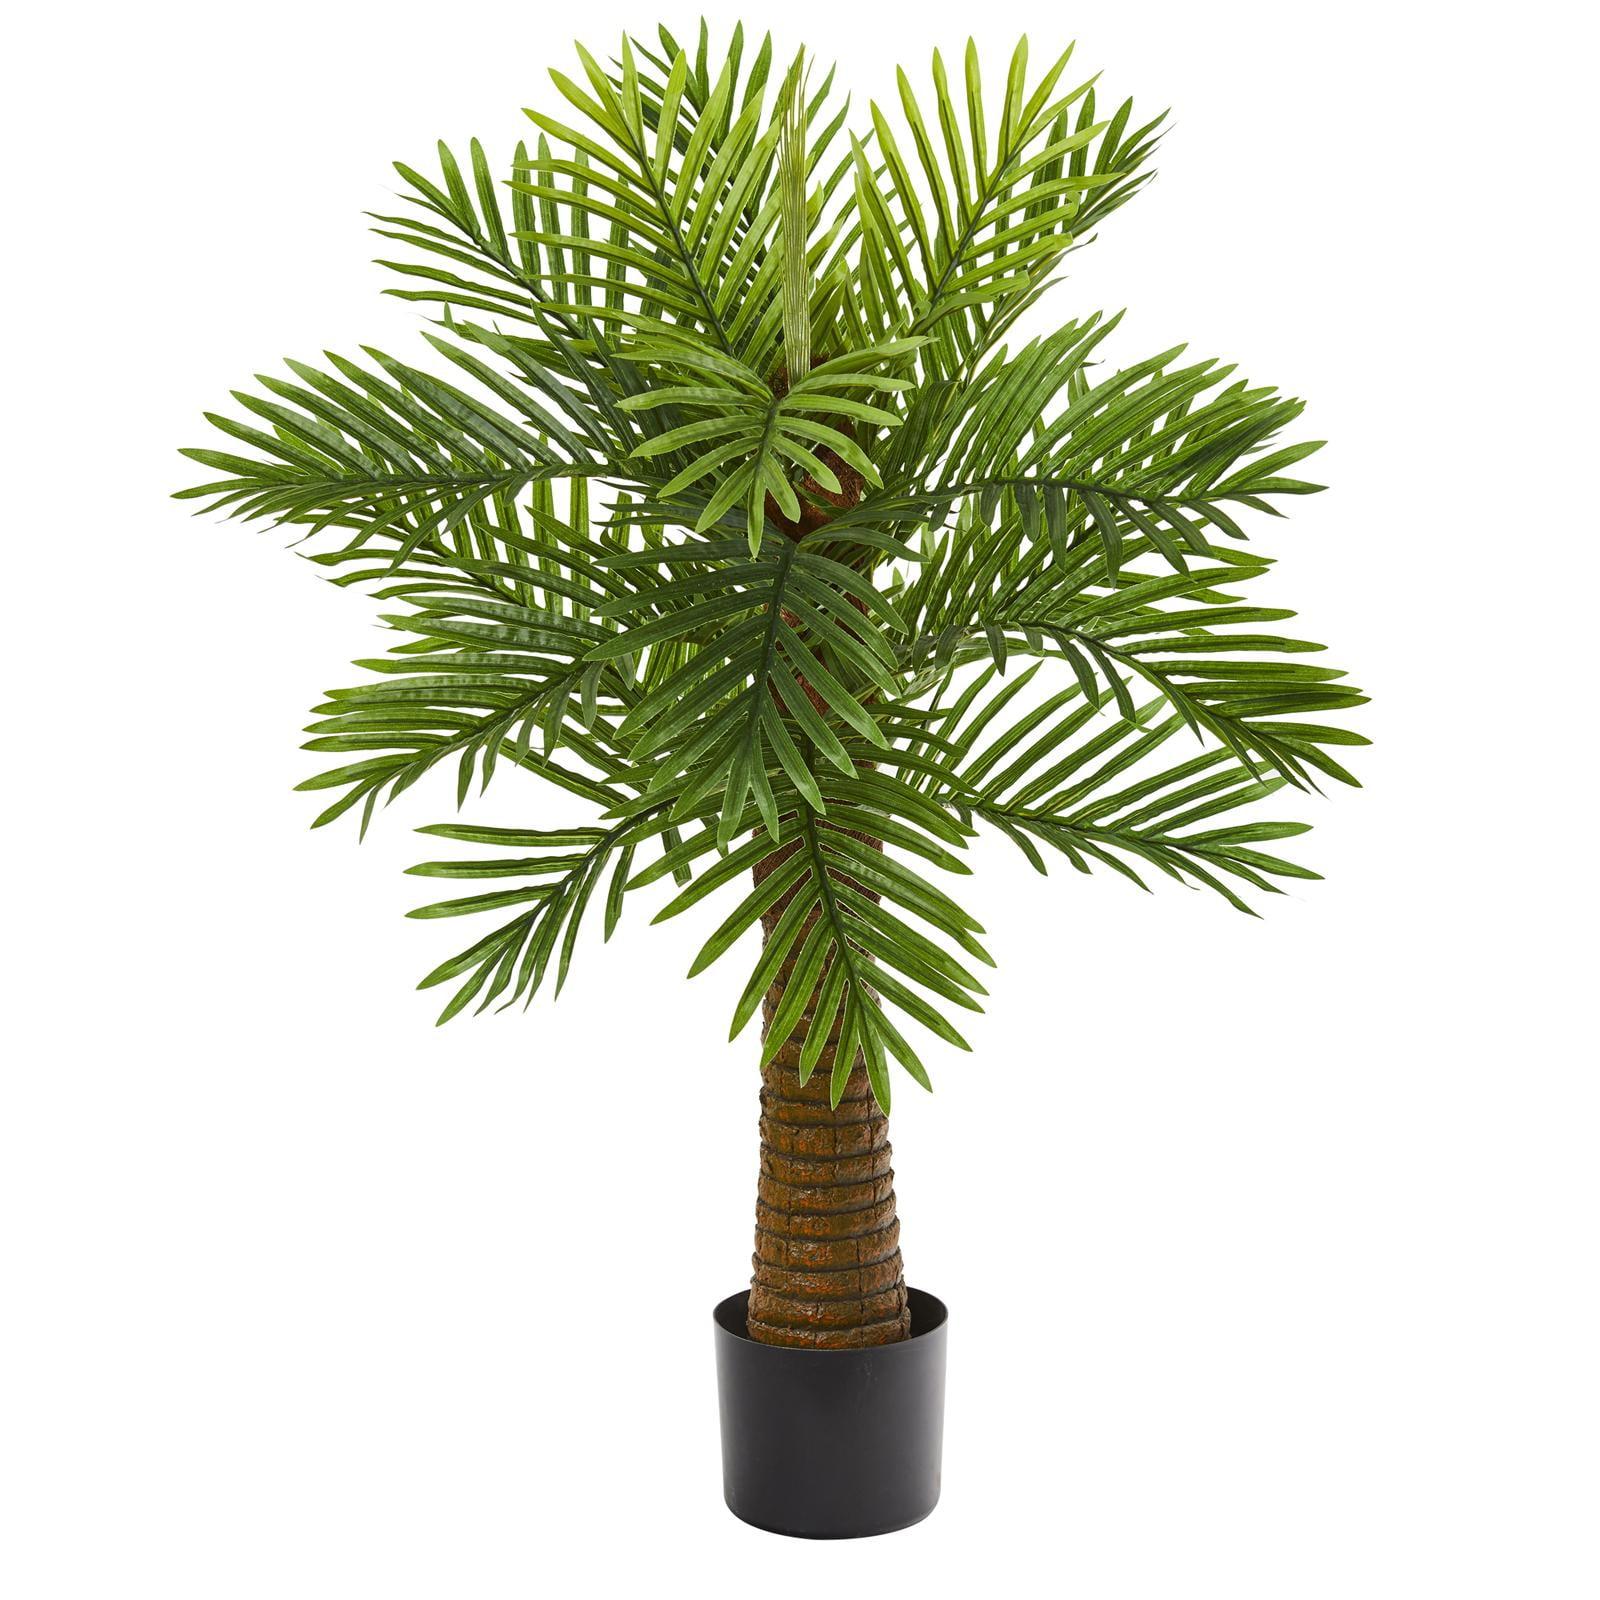 Lush Tropical Oasis 3' Robellini Palm with Textured Trunk